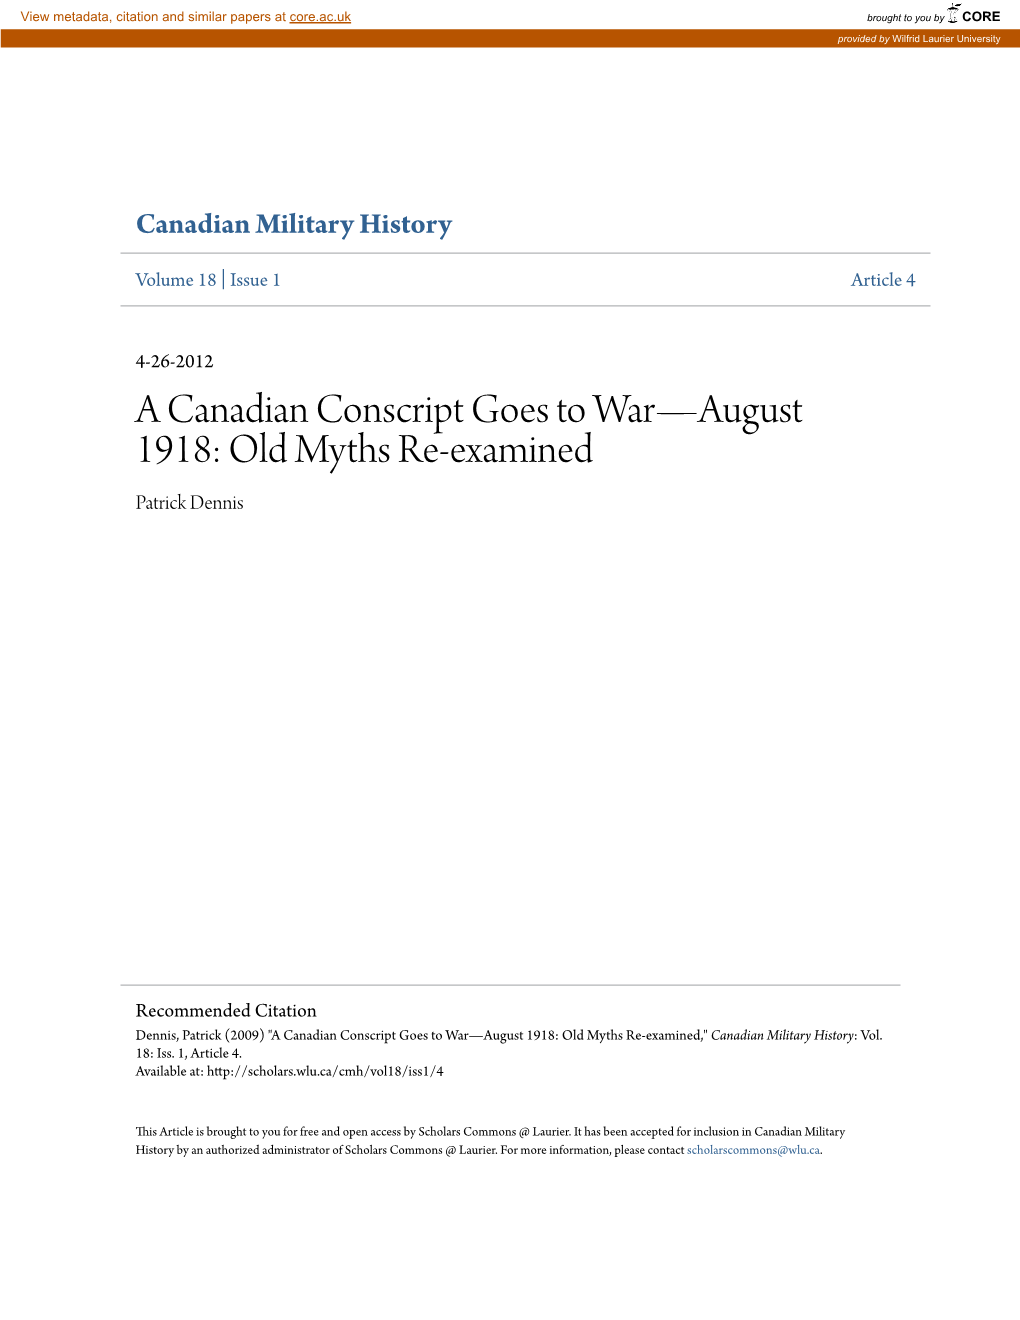 A Canadian Conscript Goes to Warâ•ﬂaugust 1918: Old Myths Re